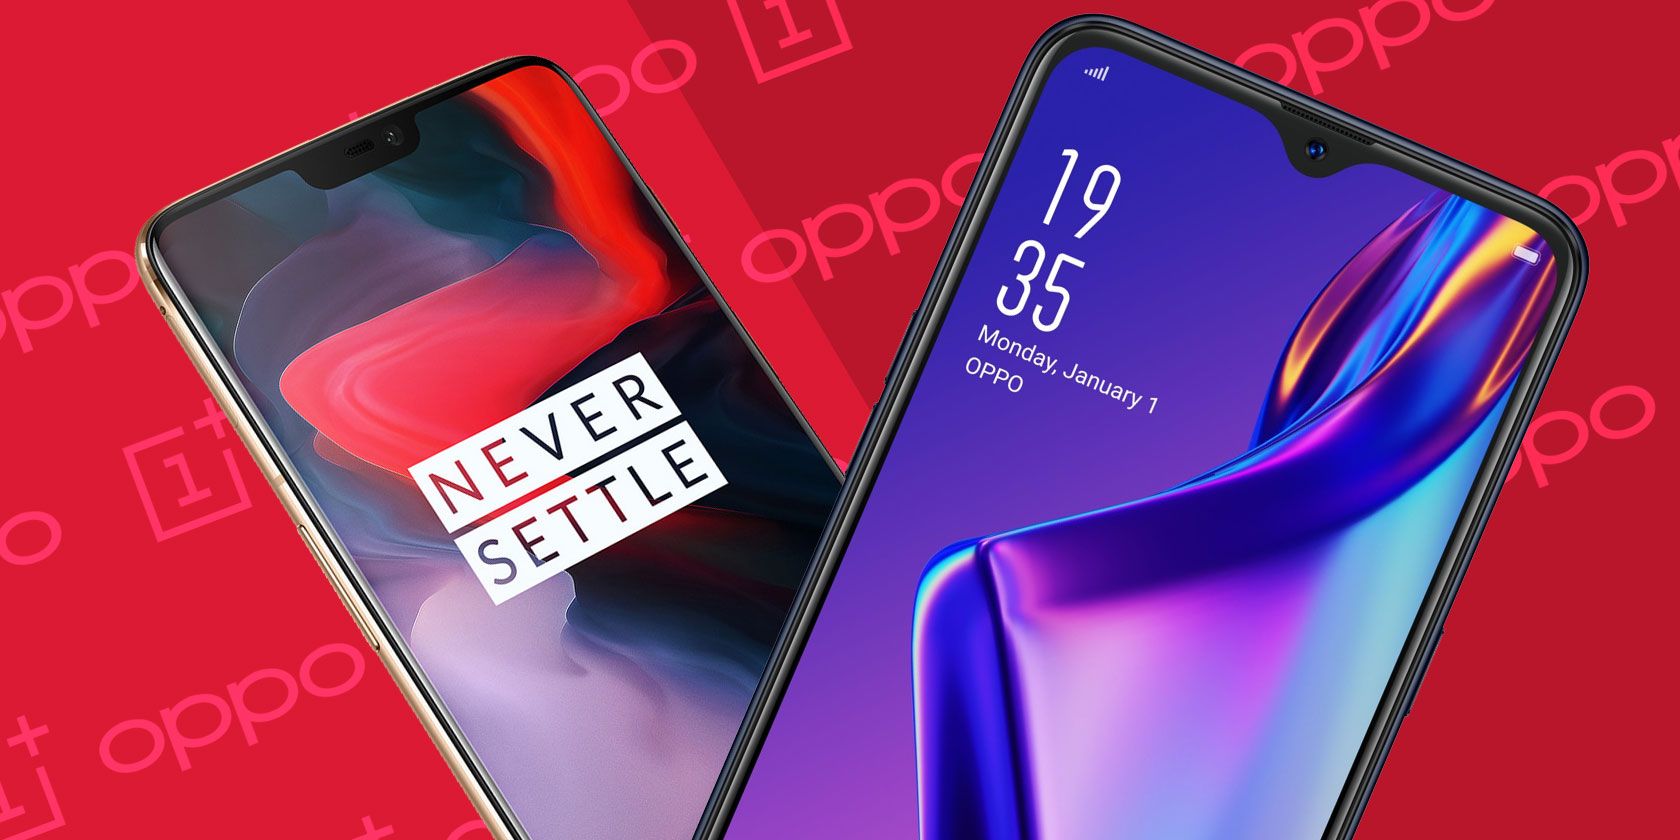 OnePlus Merges With OPPO: Is It the End of OnePlus?